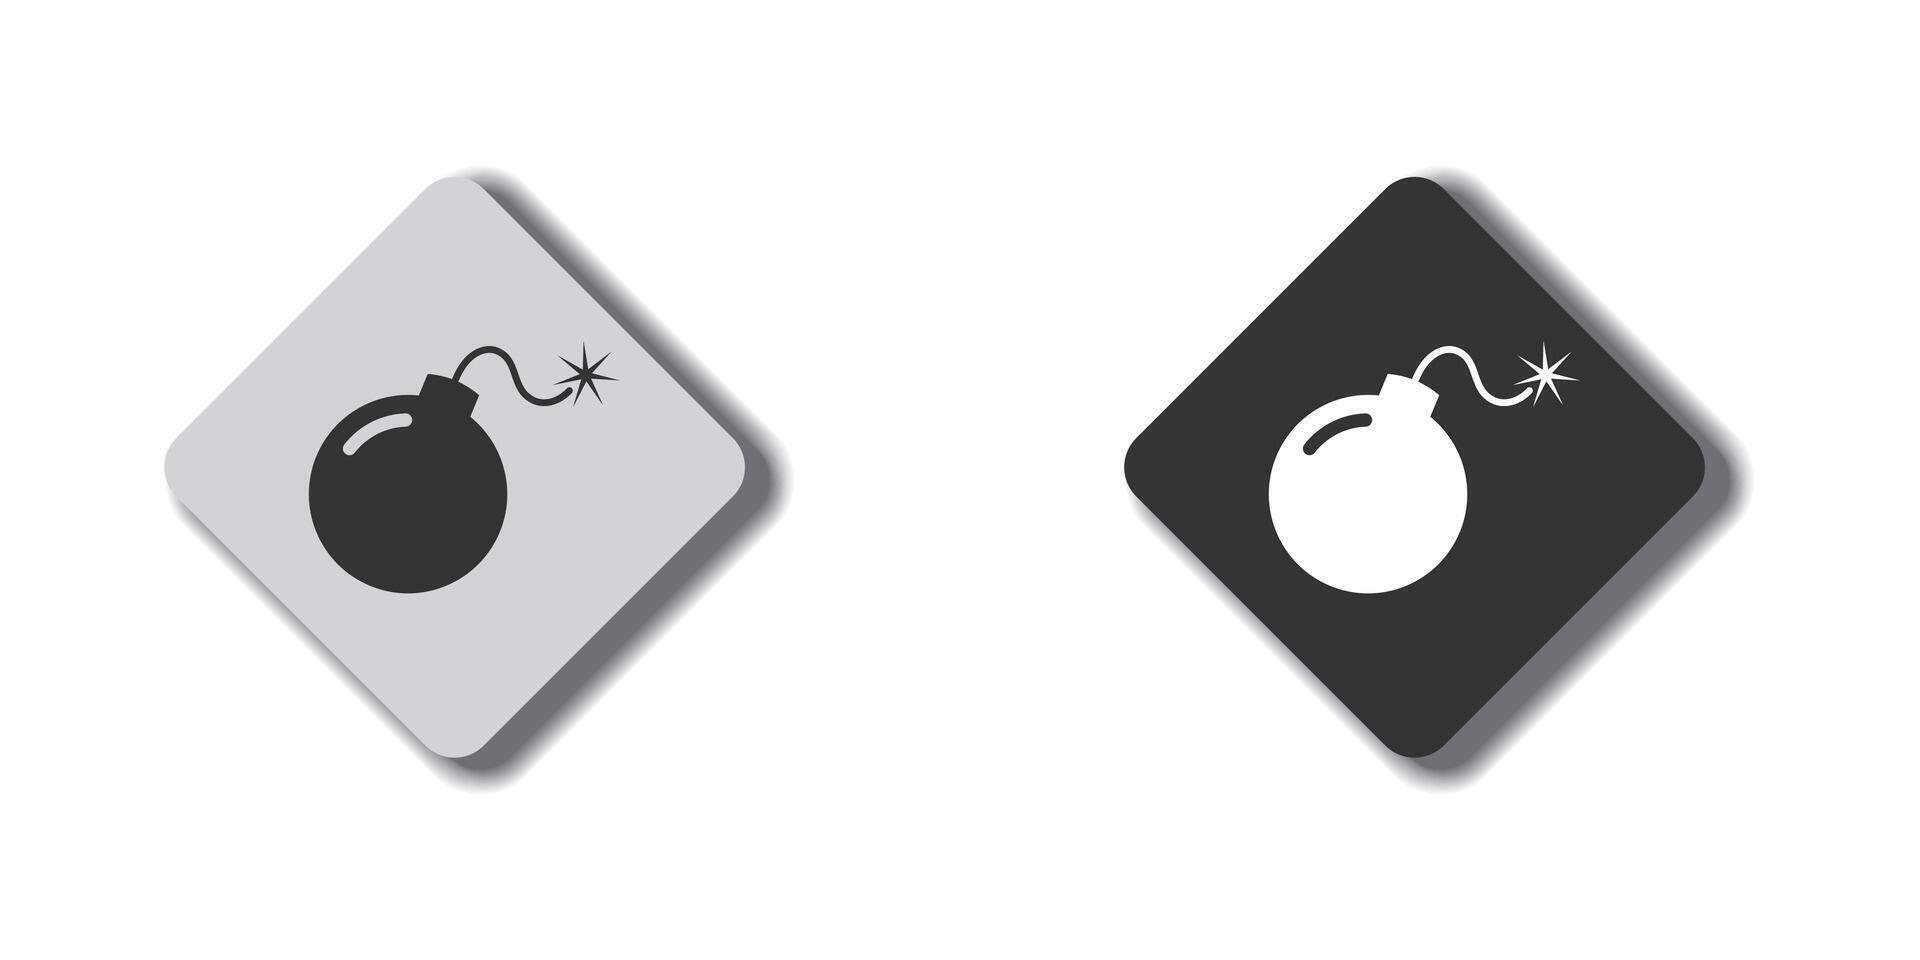 Bomb icon on badge with shadow. Vector illustration.